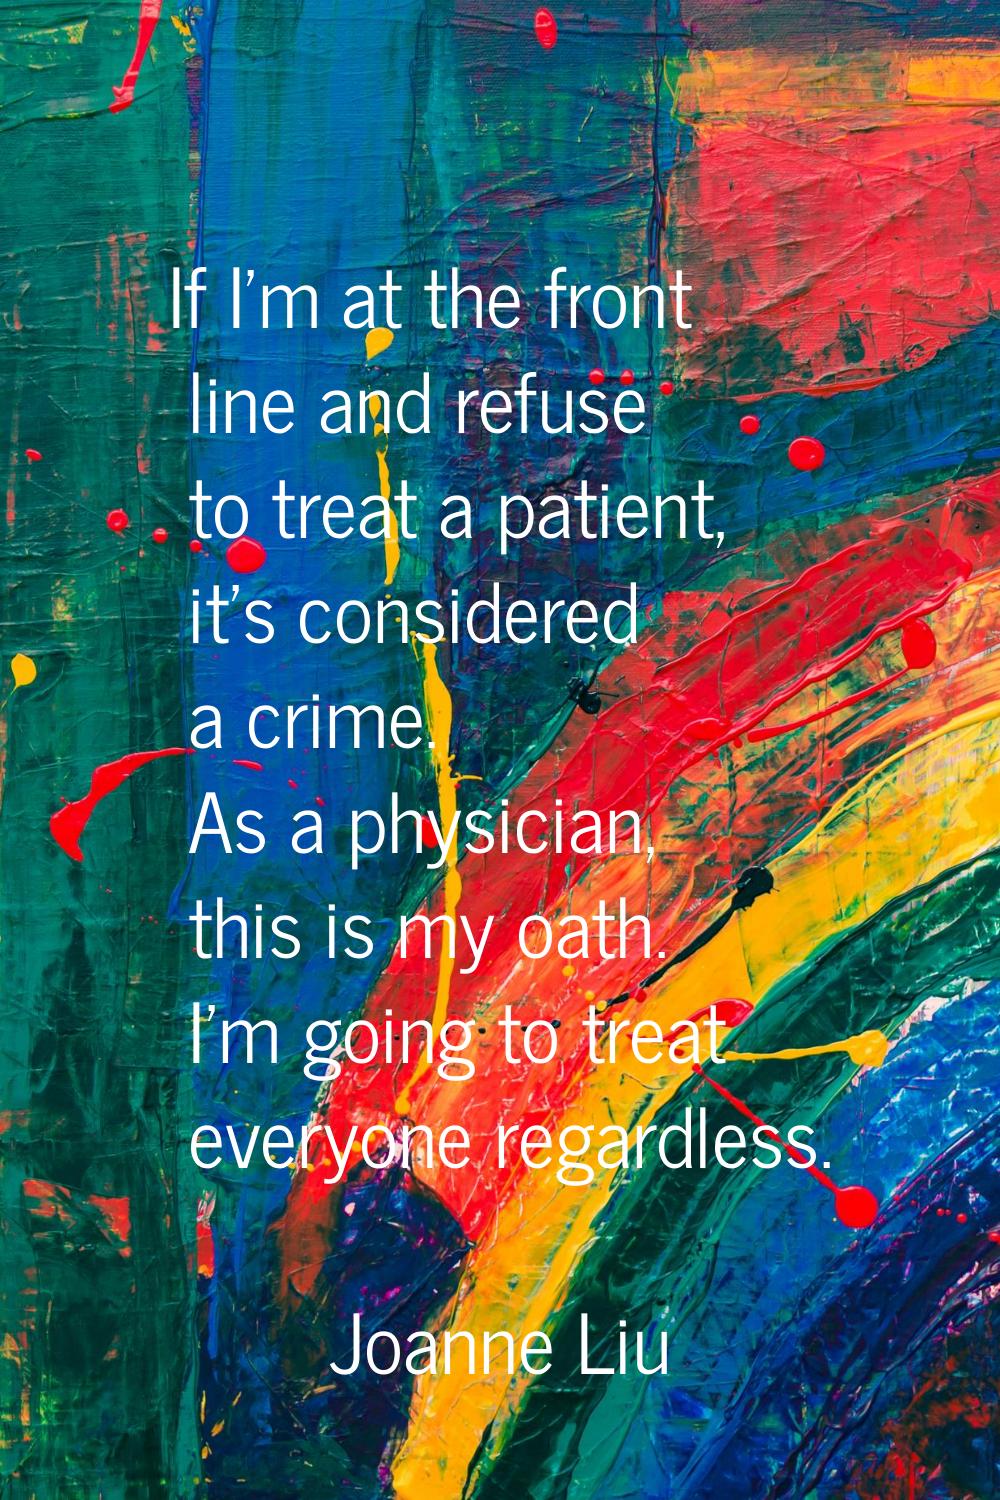 If I'm at the front line and refuse to treat a patient, it's considered a crime. As a physician, th